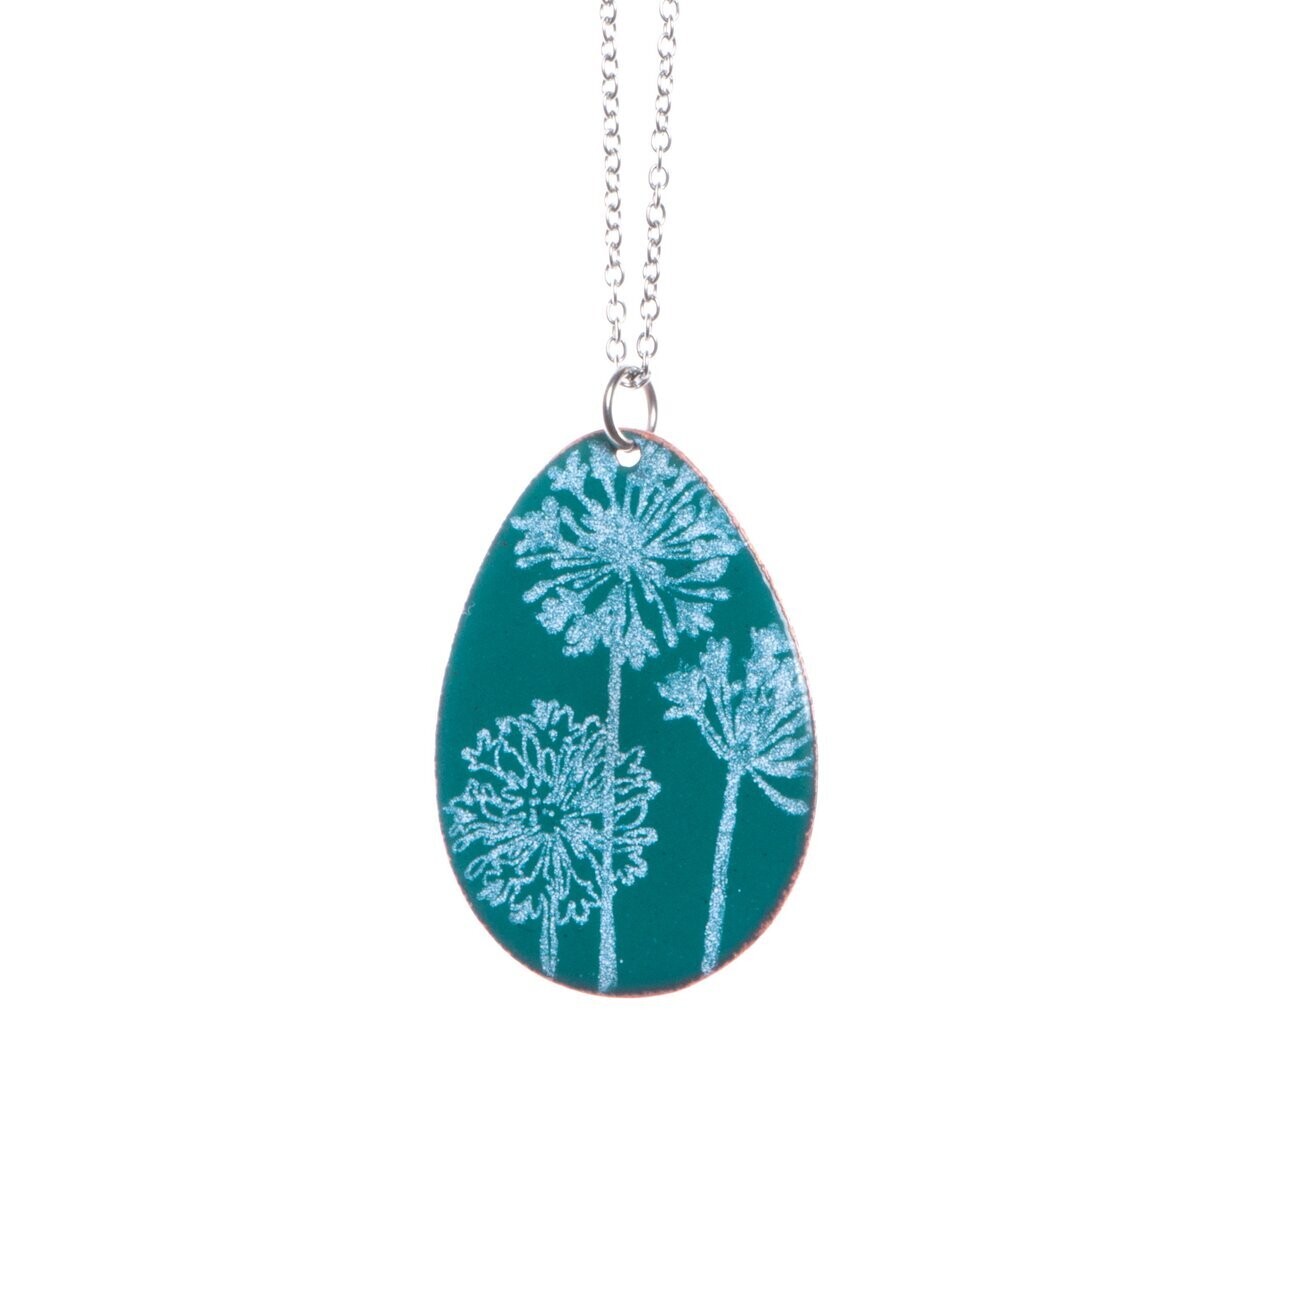 Dandelions Teal & White Necklace - Aflame 